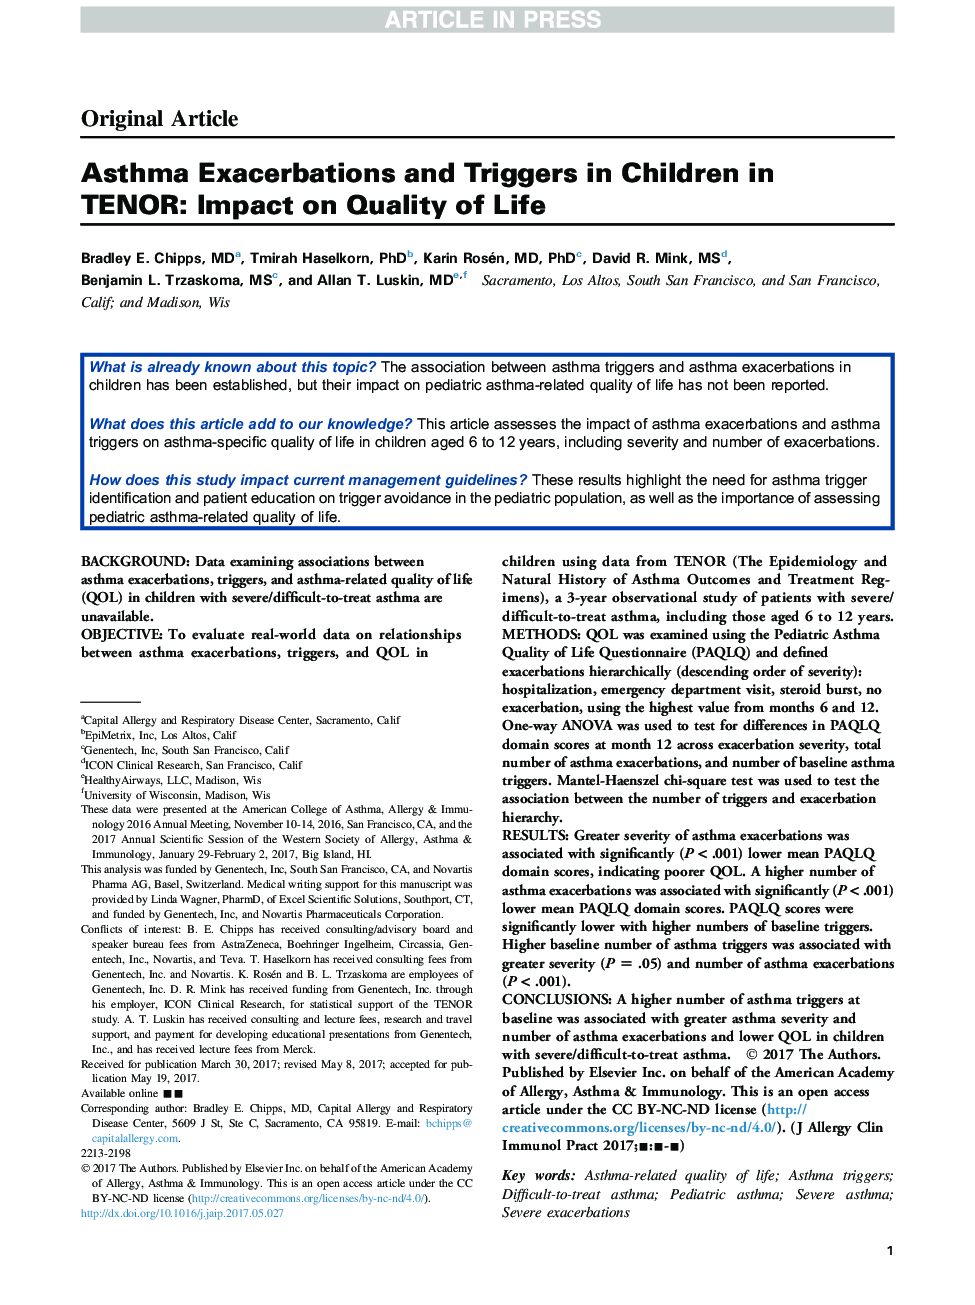 Asthma Exacerbations and Triggers in Children in TENOR: Impact on Quality of Life